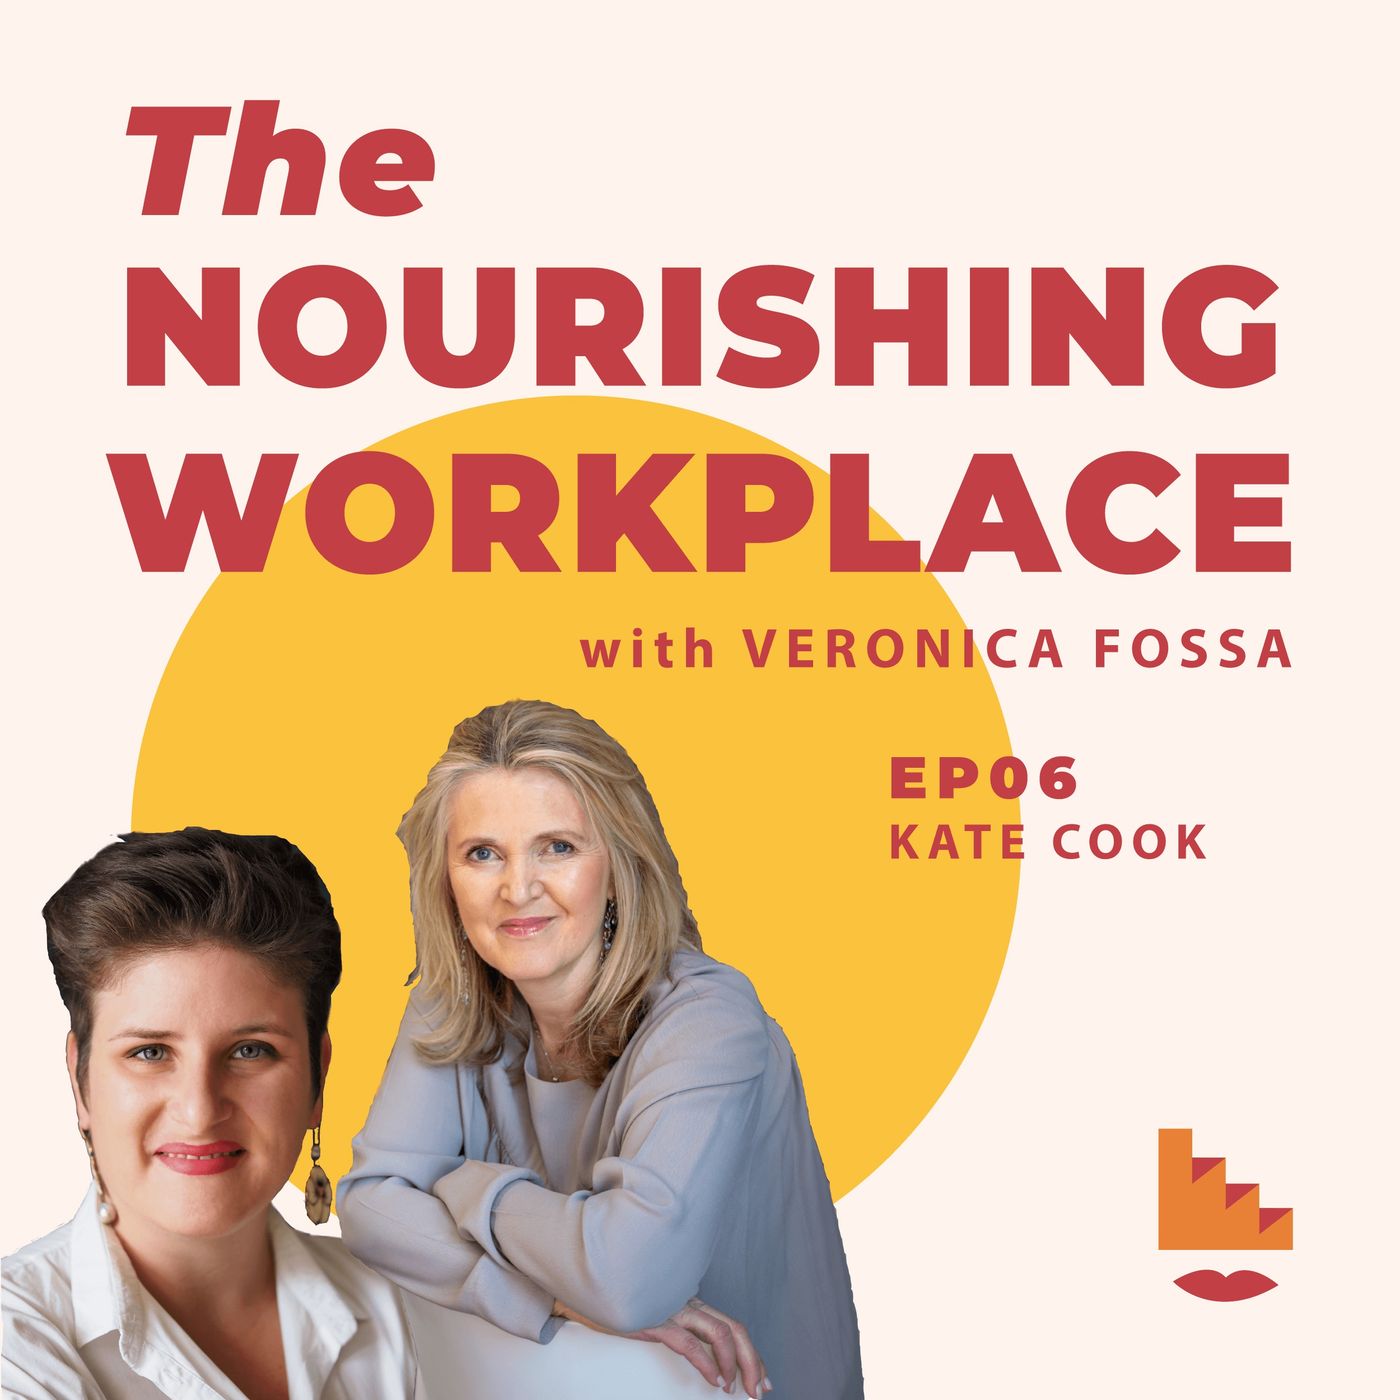 The Importance of Nutrition and Wellness in the Workplace with Kate Cook